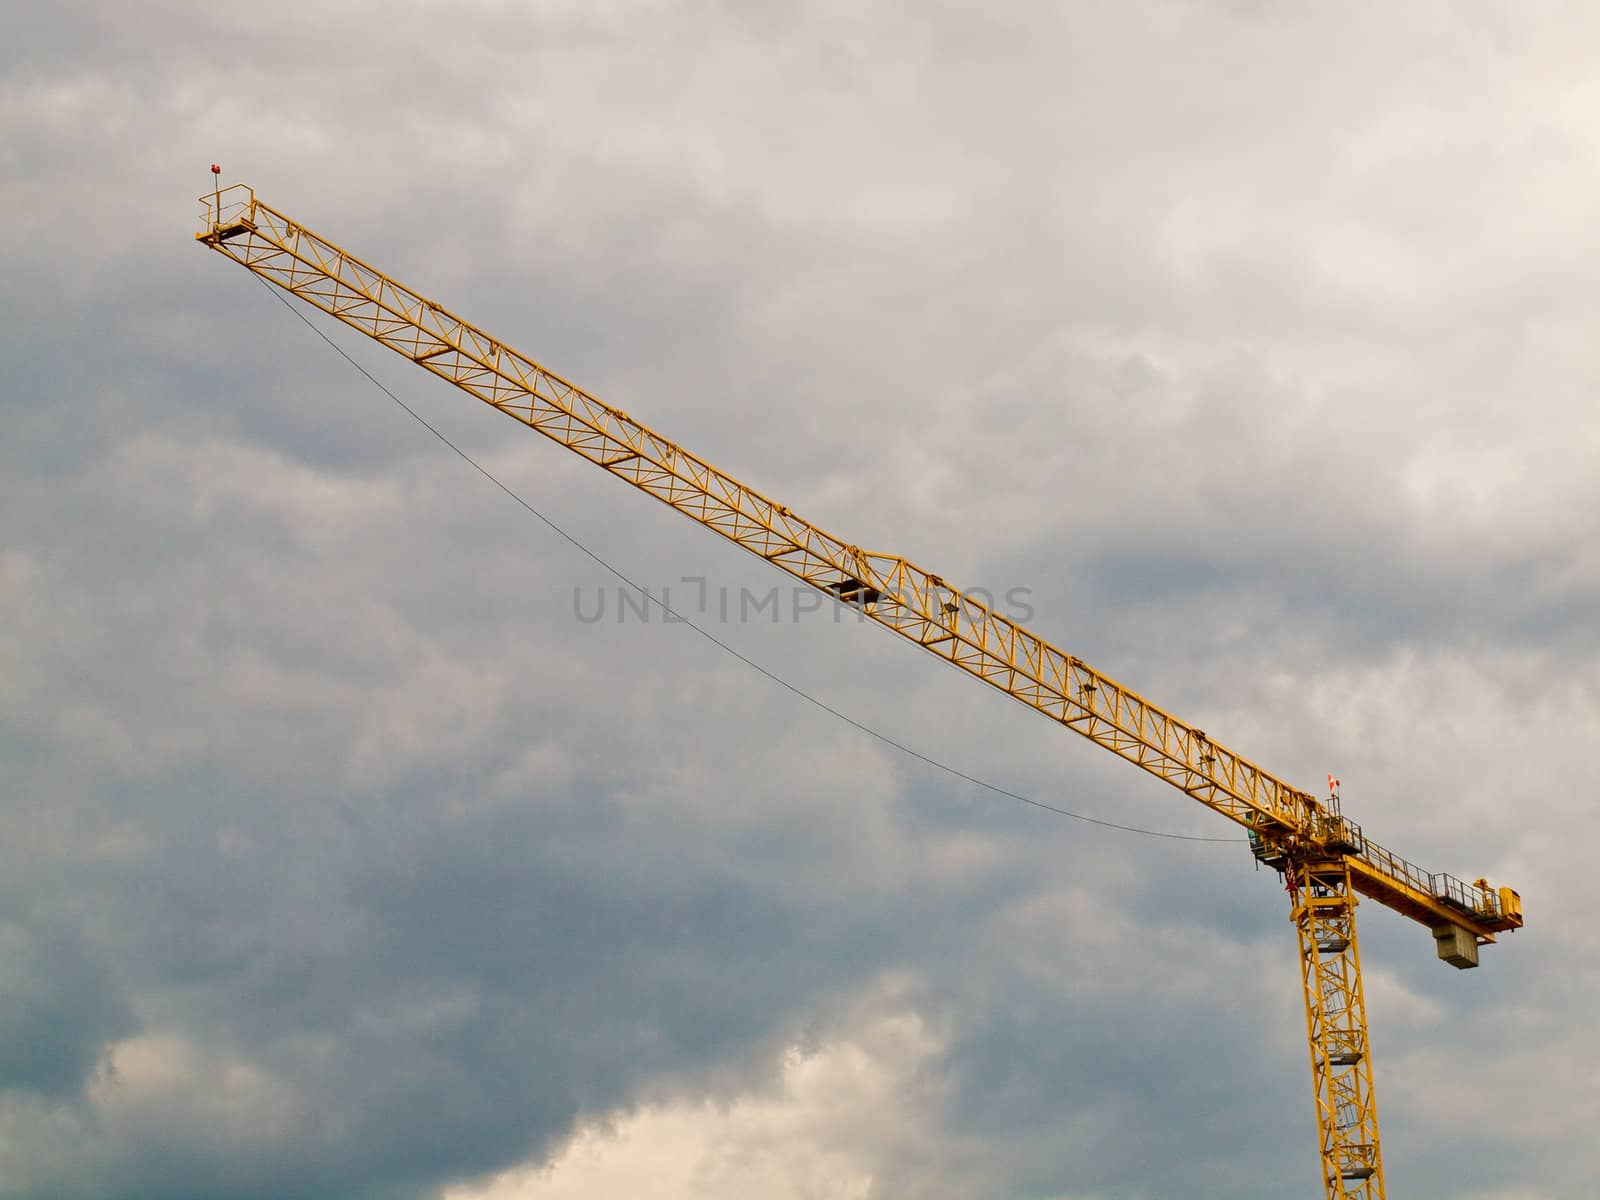 Large Construction Crane in Front of a Cloudy Sky